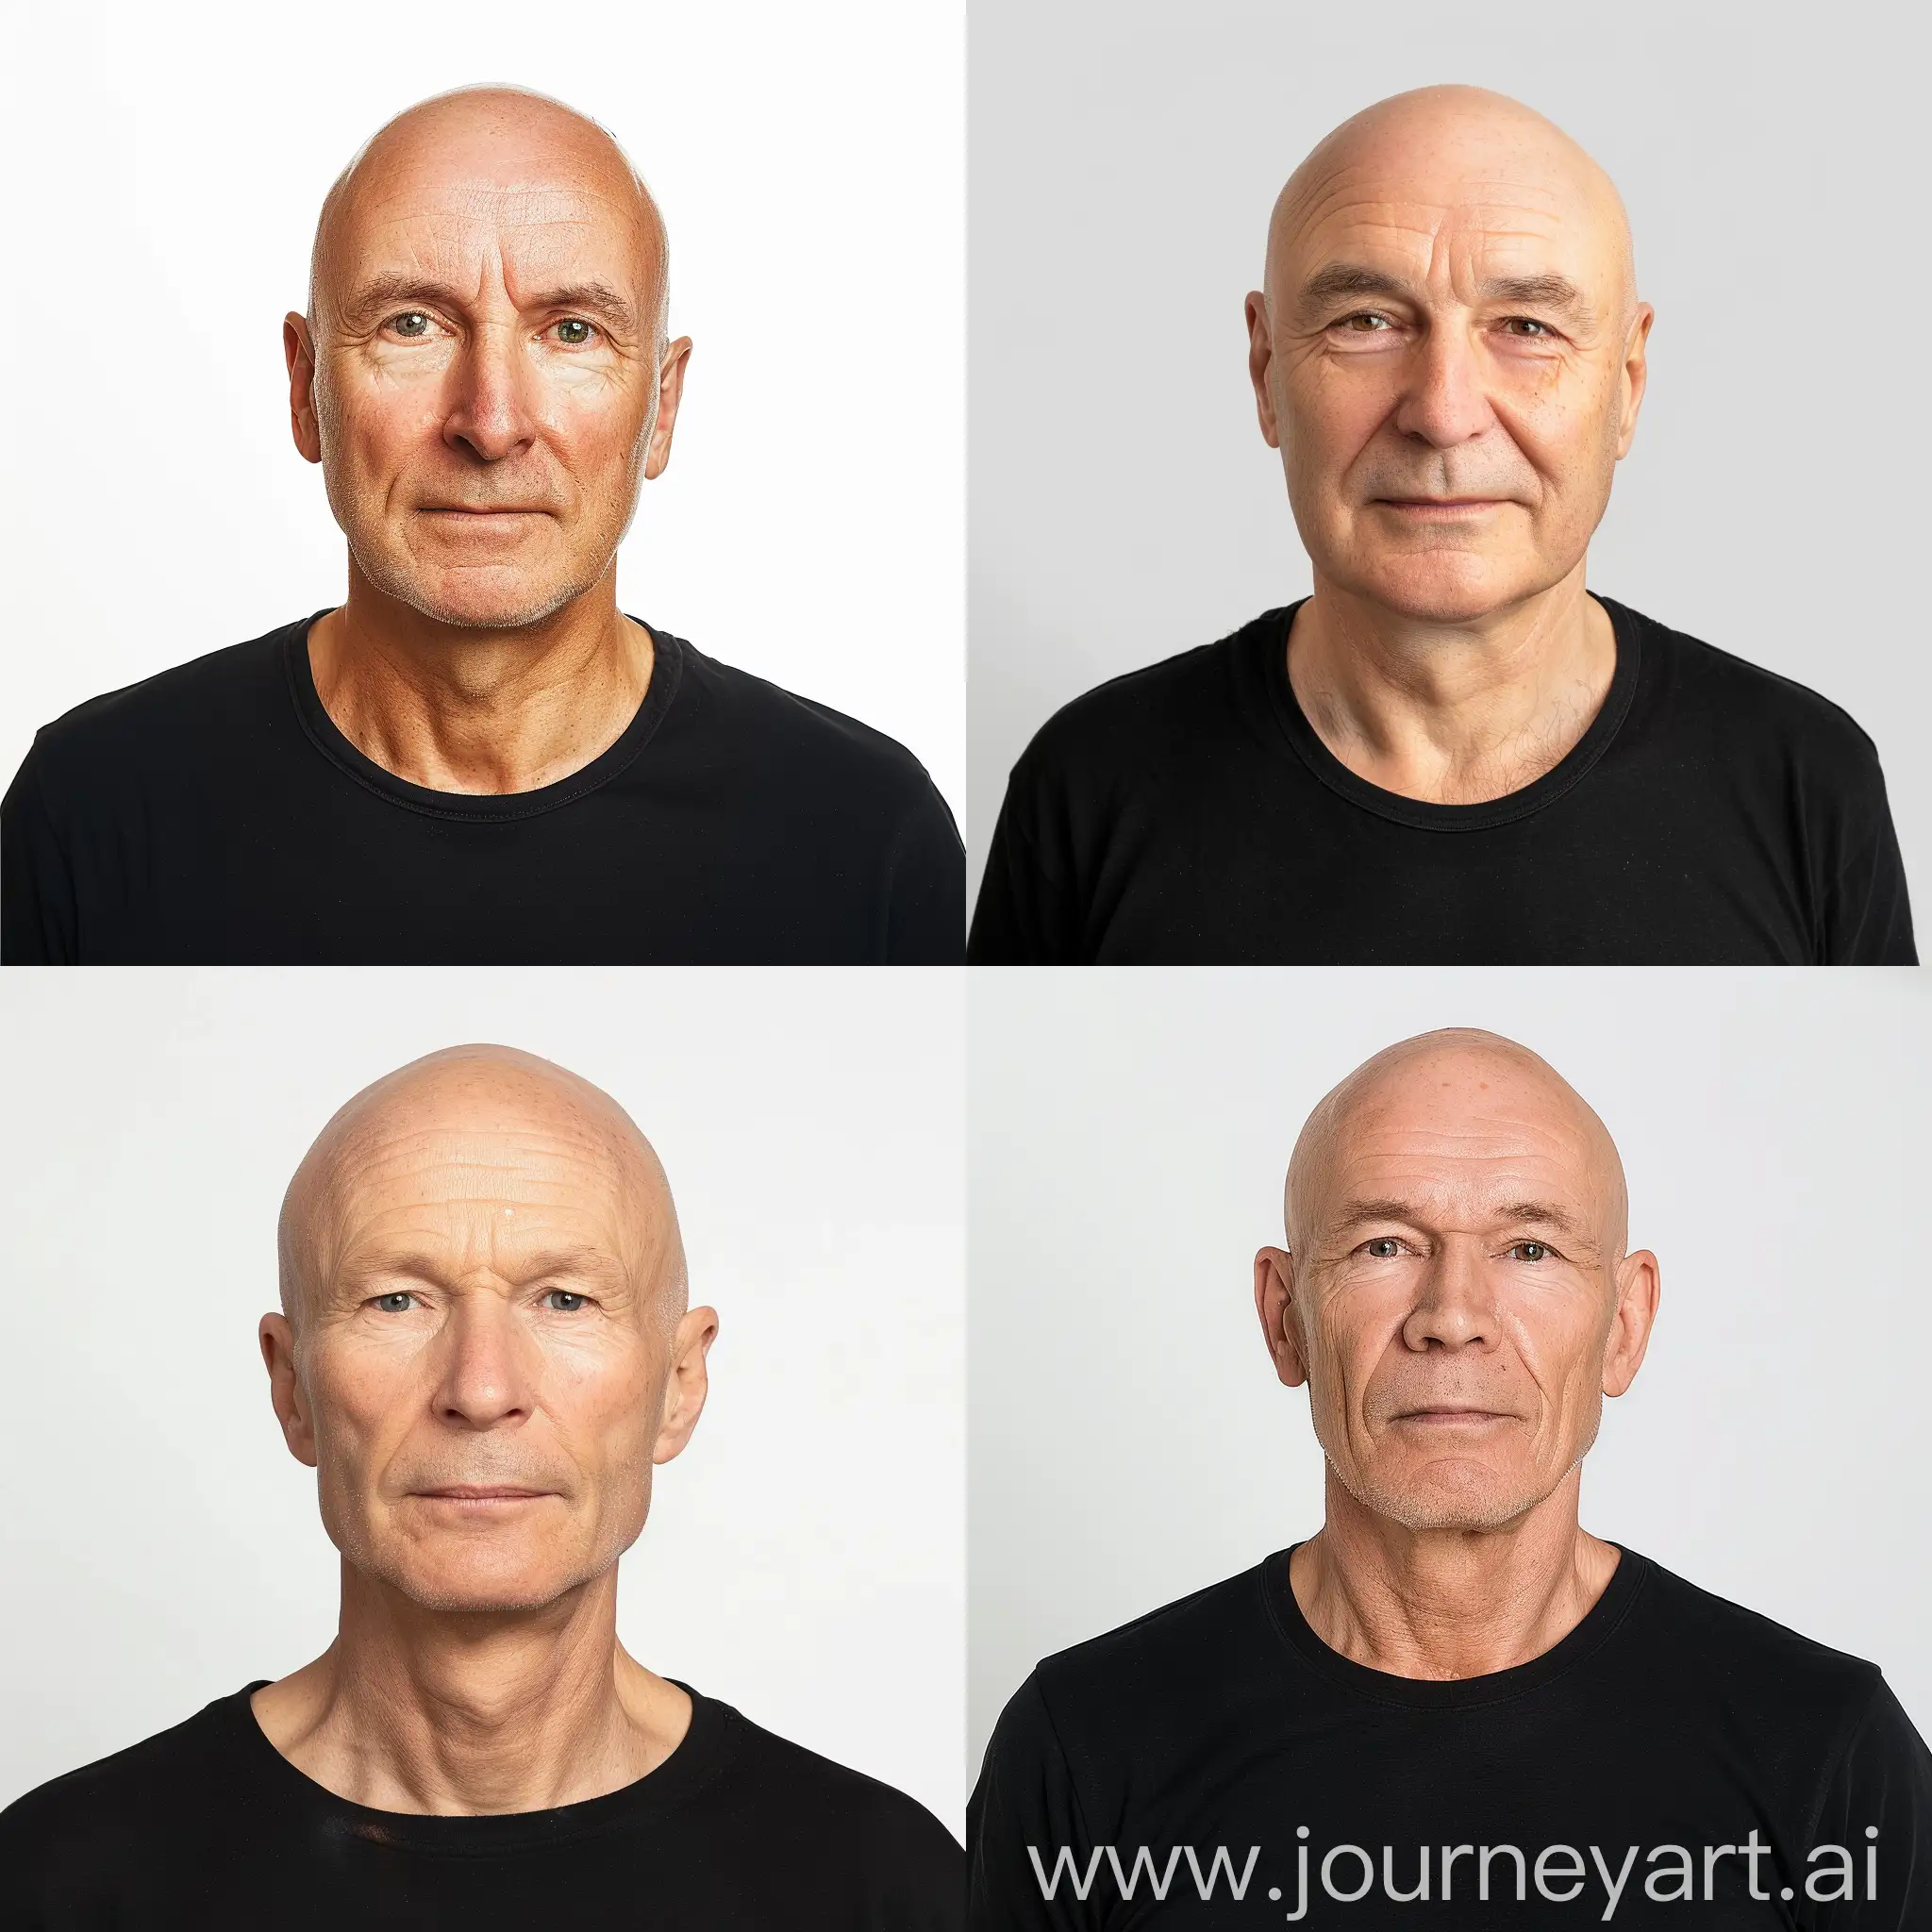 MiddleAged-Bald-Man-in-Black-TShirt-on-White-Background